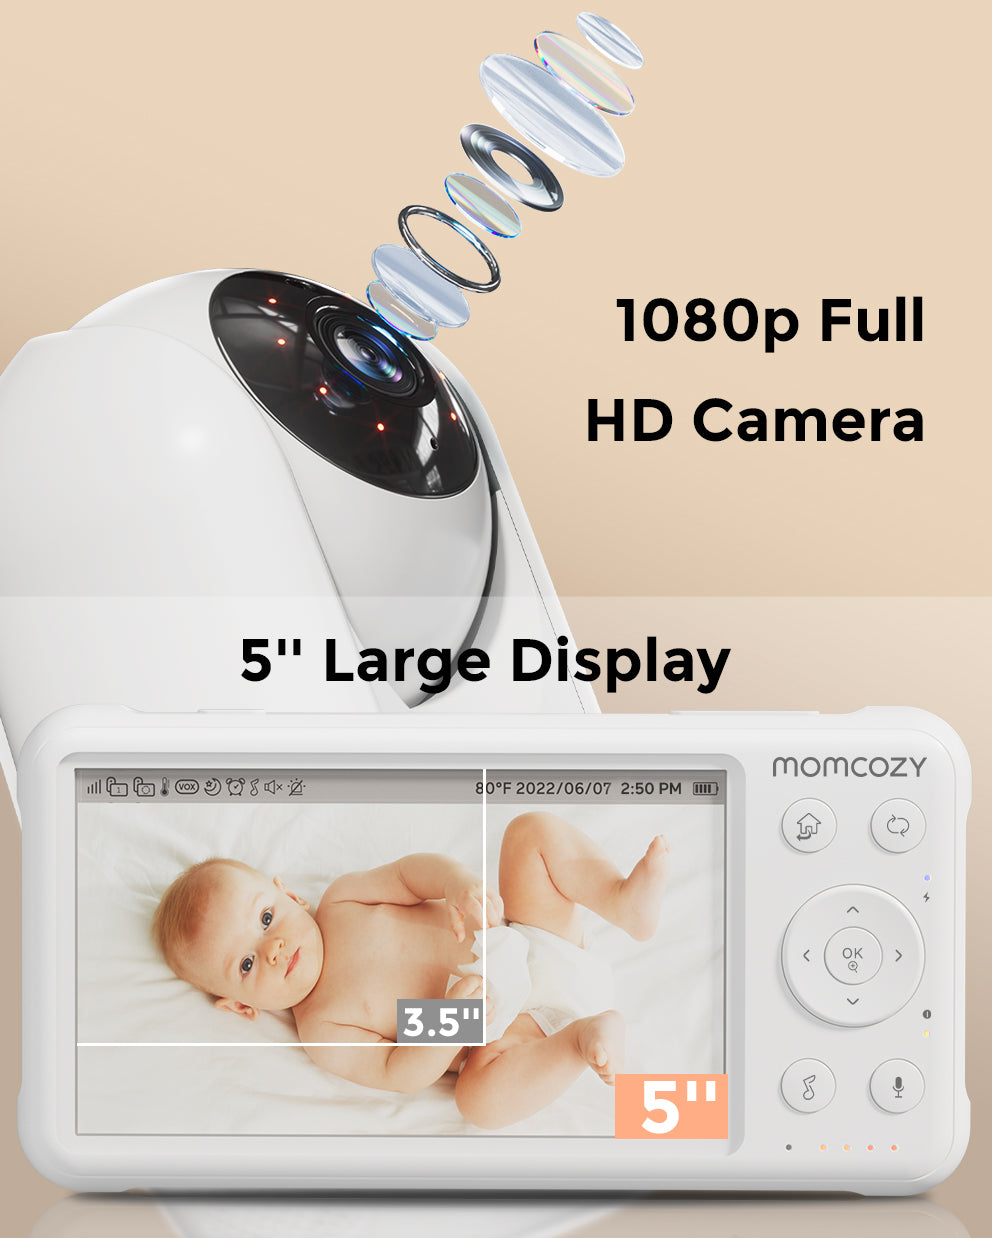 Wi-Fi Remote Access Camera Video Baby Monitor with 5 display and 1080p HD  360 degree Panoramic Viewing Pan & Tilt Camera